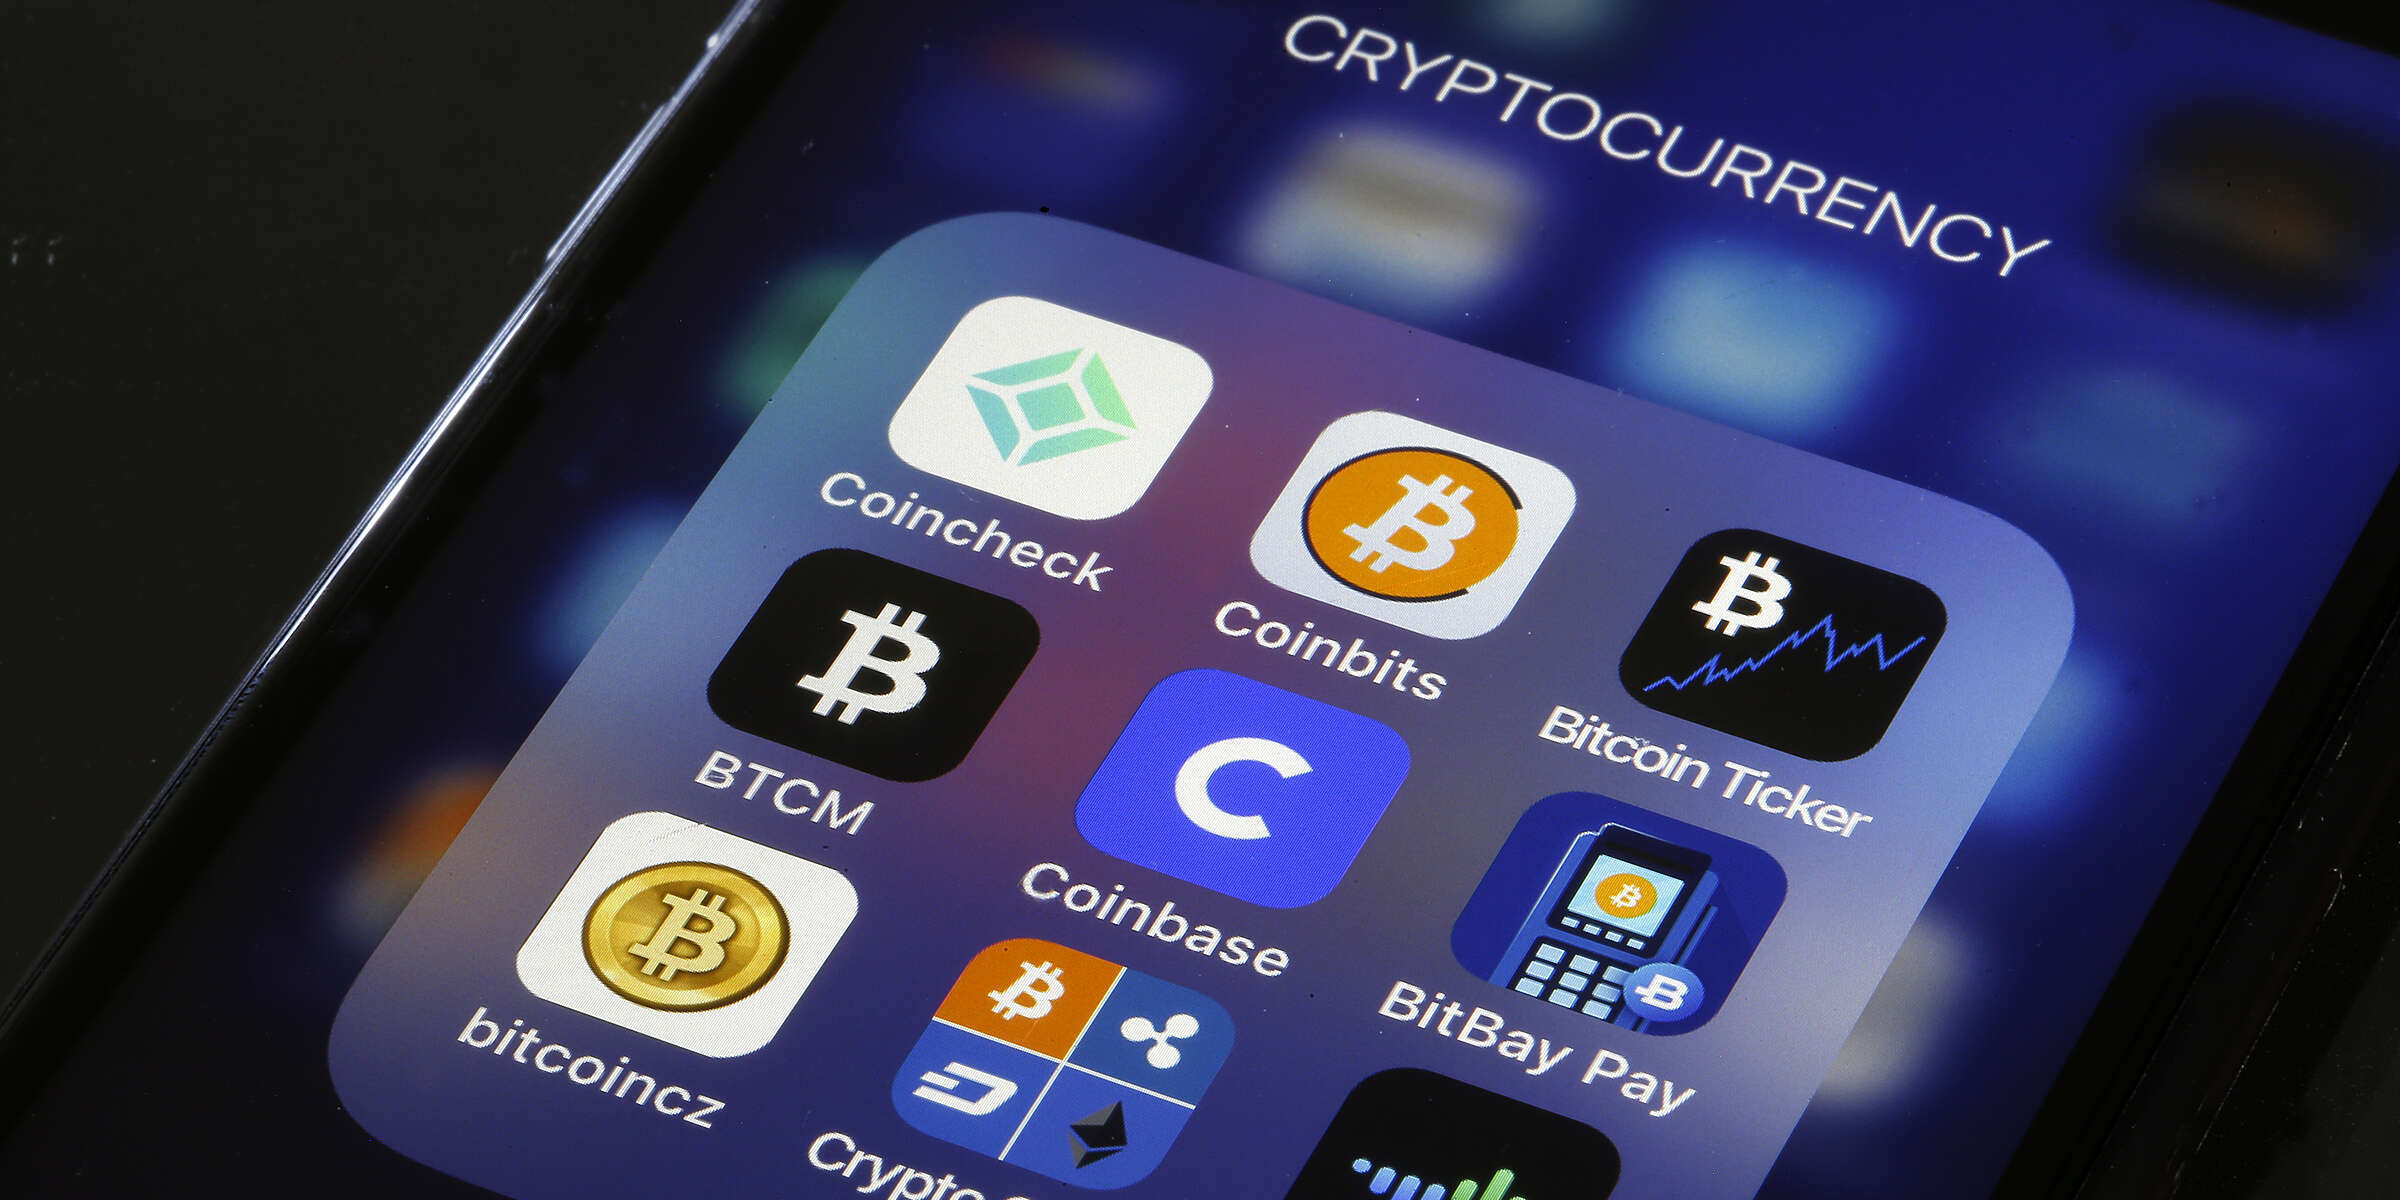 New standard is set for digital currencies